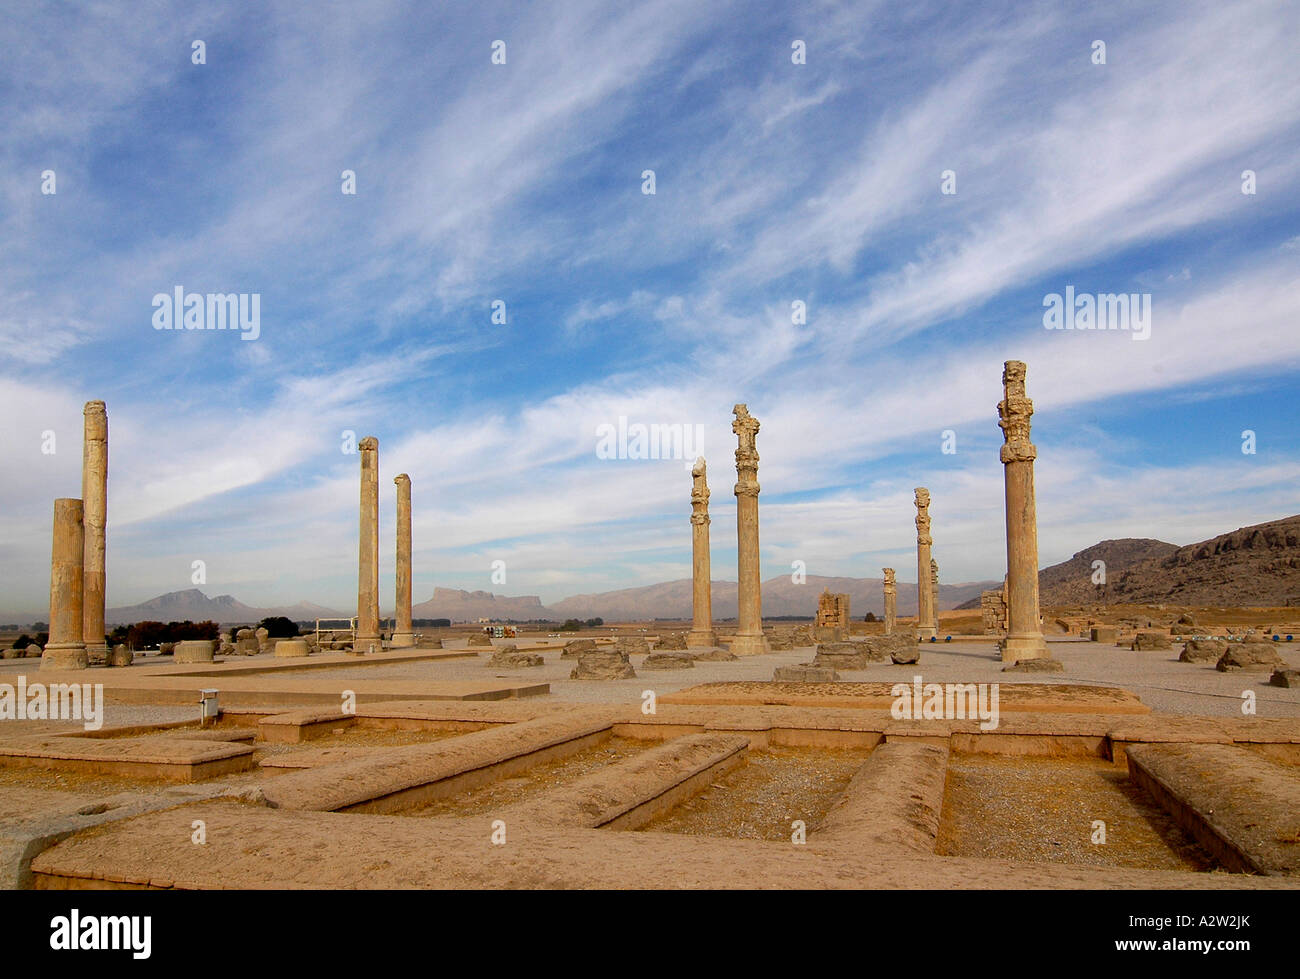 General overview of the remains of a palace at the Persepolis archeological site, near Shiraz, Iran. Stock Photo